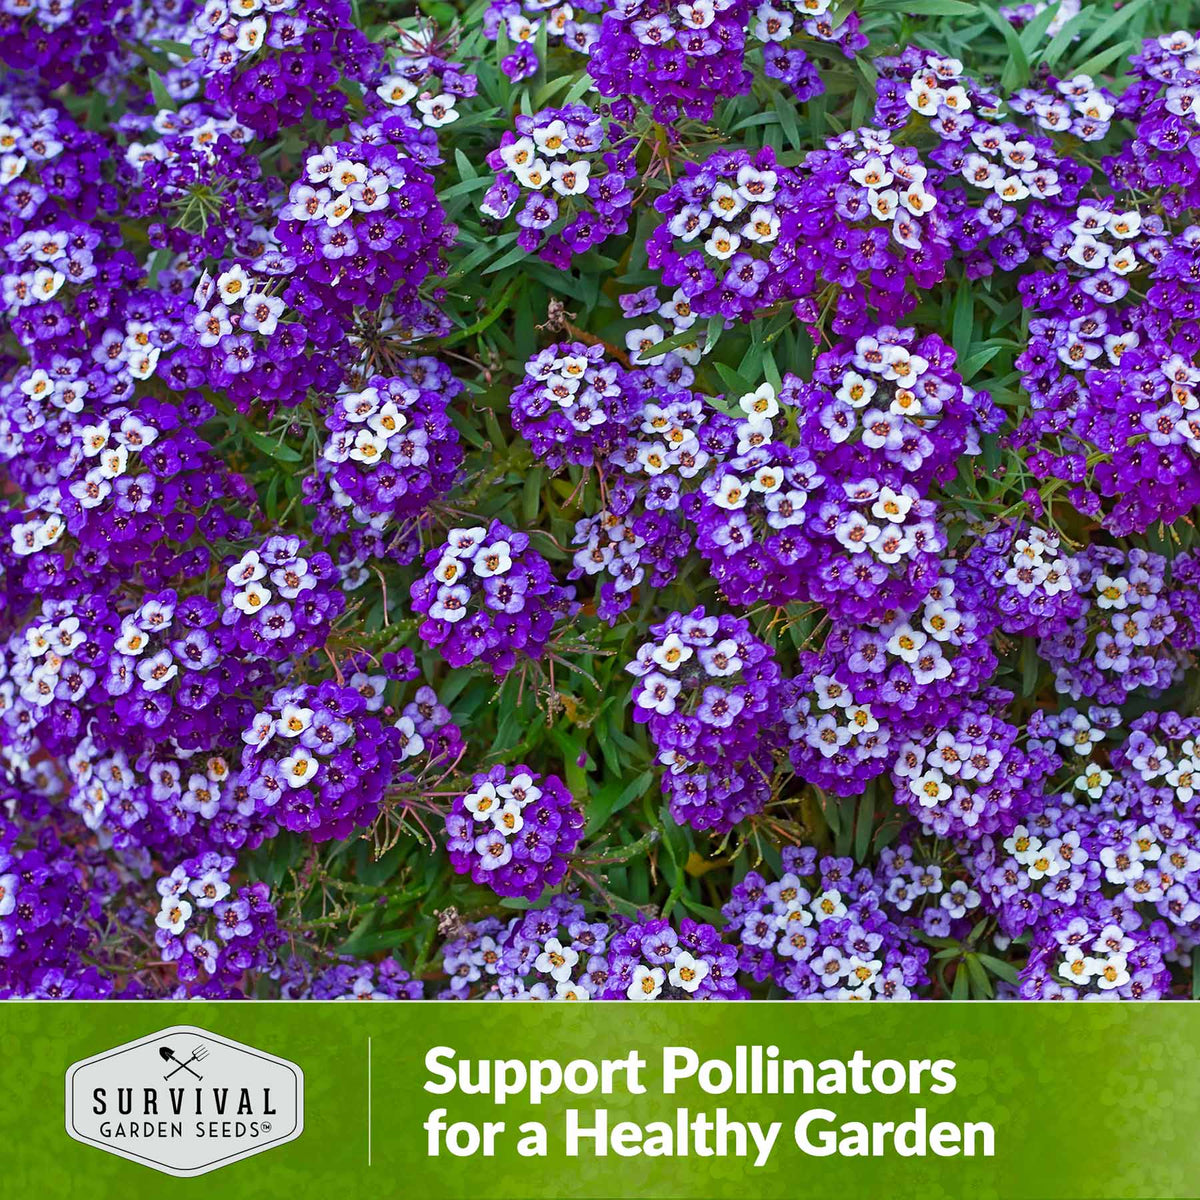 Support Pollinators for a Healthy Garden